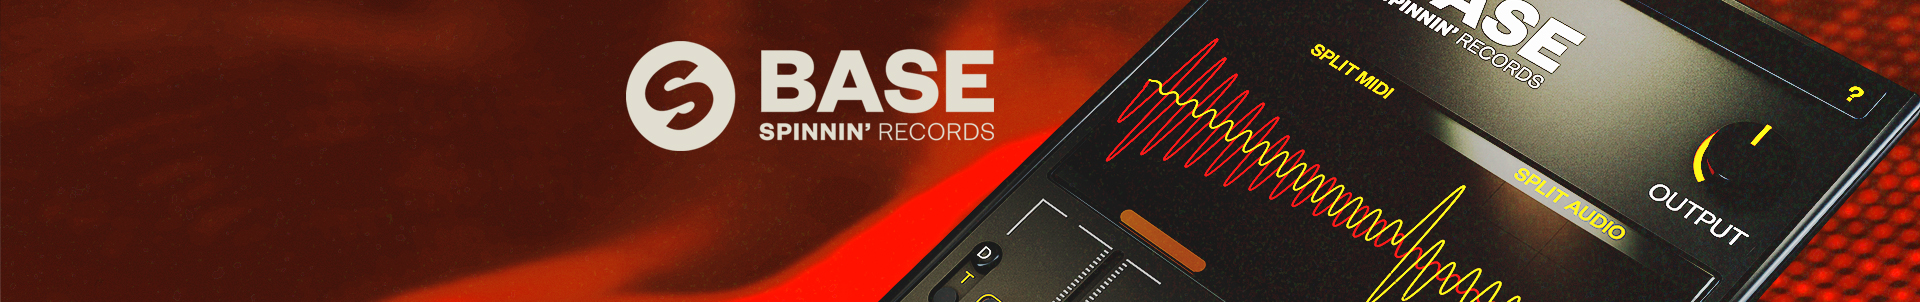 Spinnin' launches its own plugin BASE